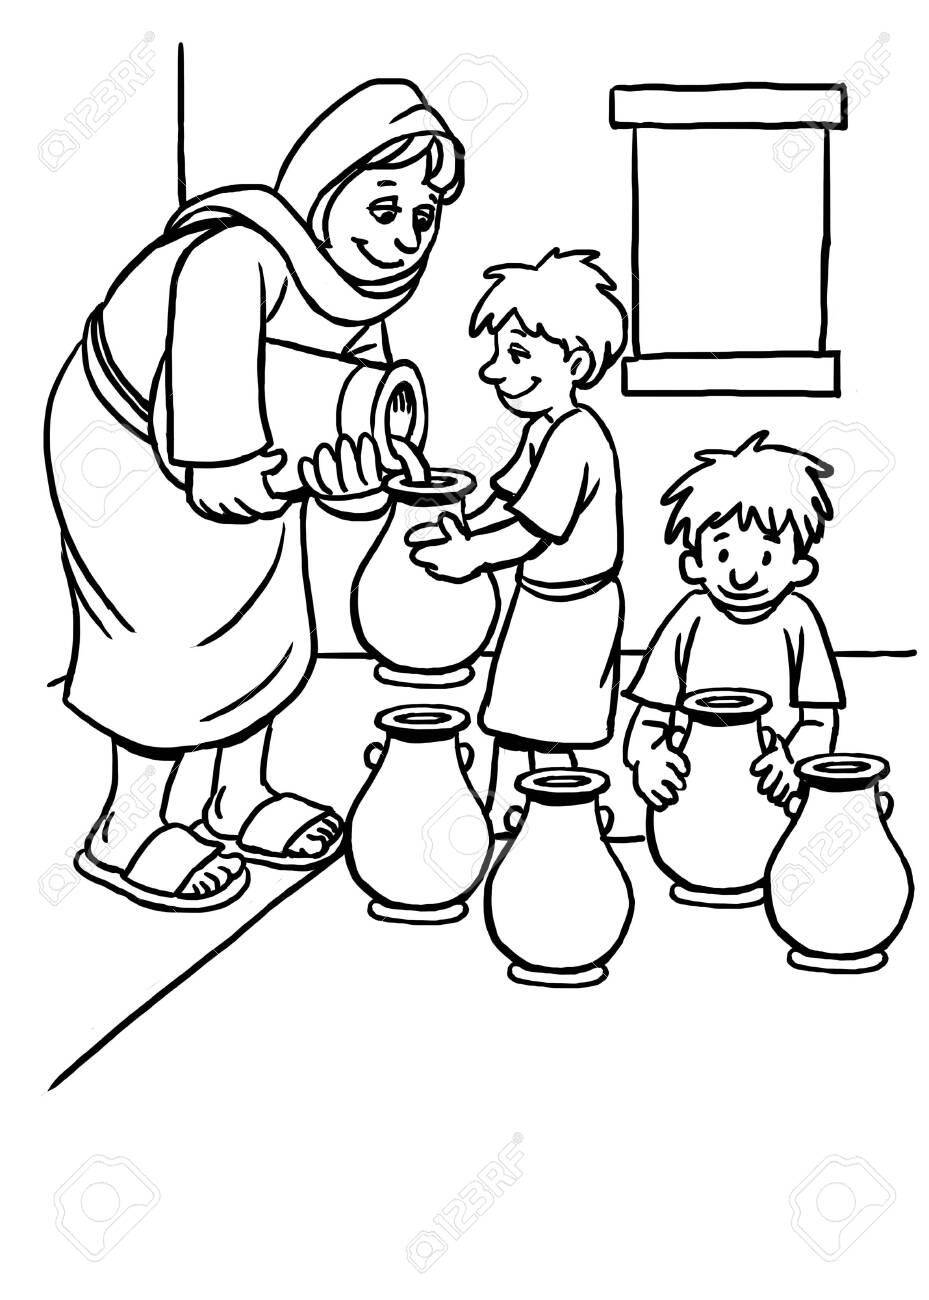 Coloring page of widows oil stock photo picture and royalty free image image